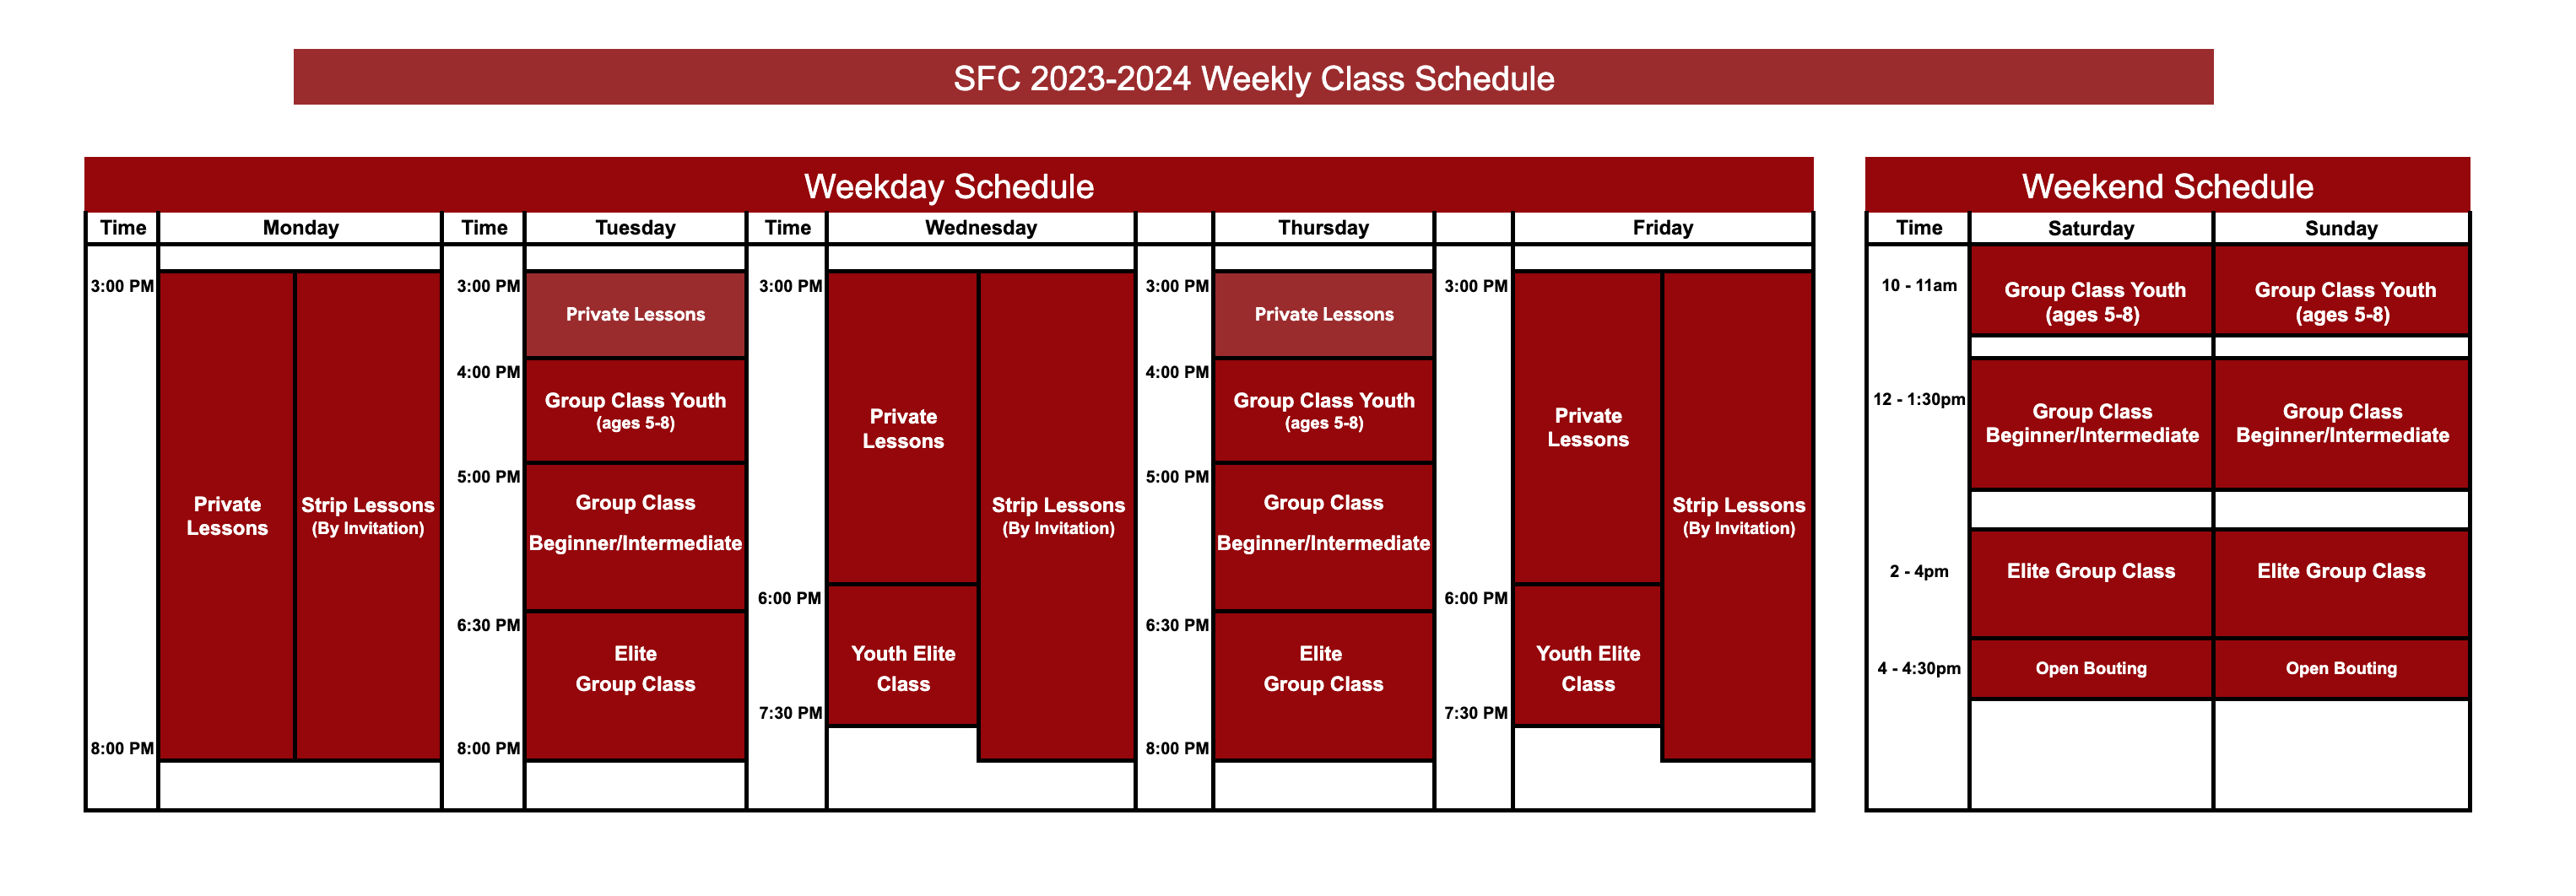 SFC 2023-2024 Weekly class schedule